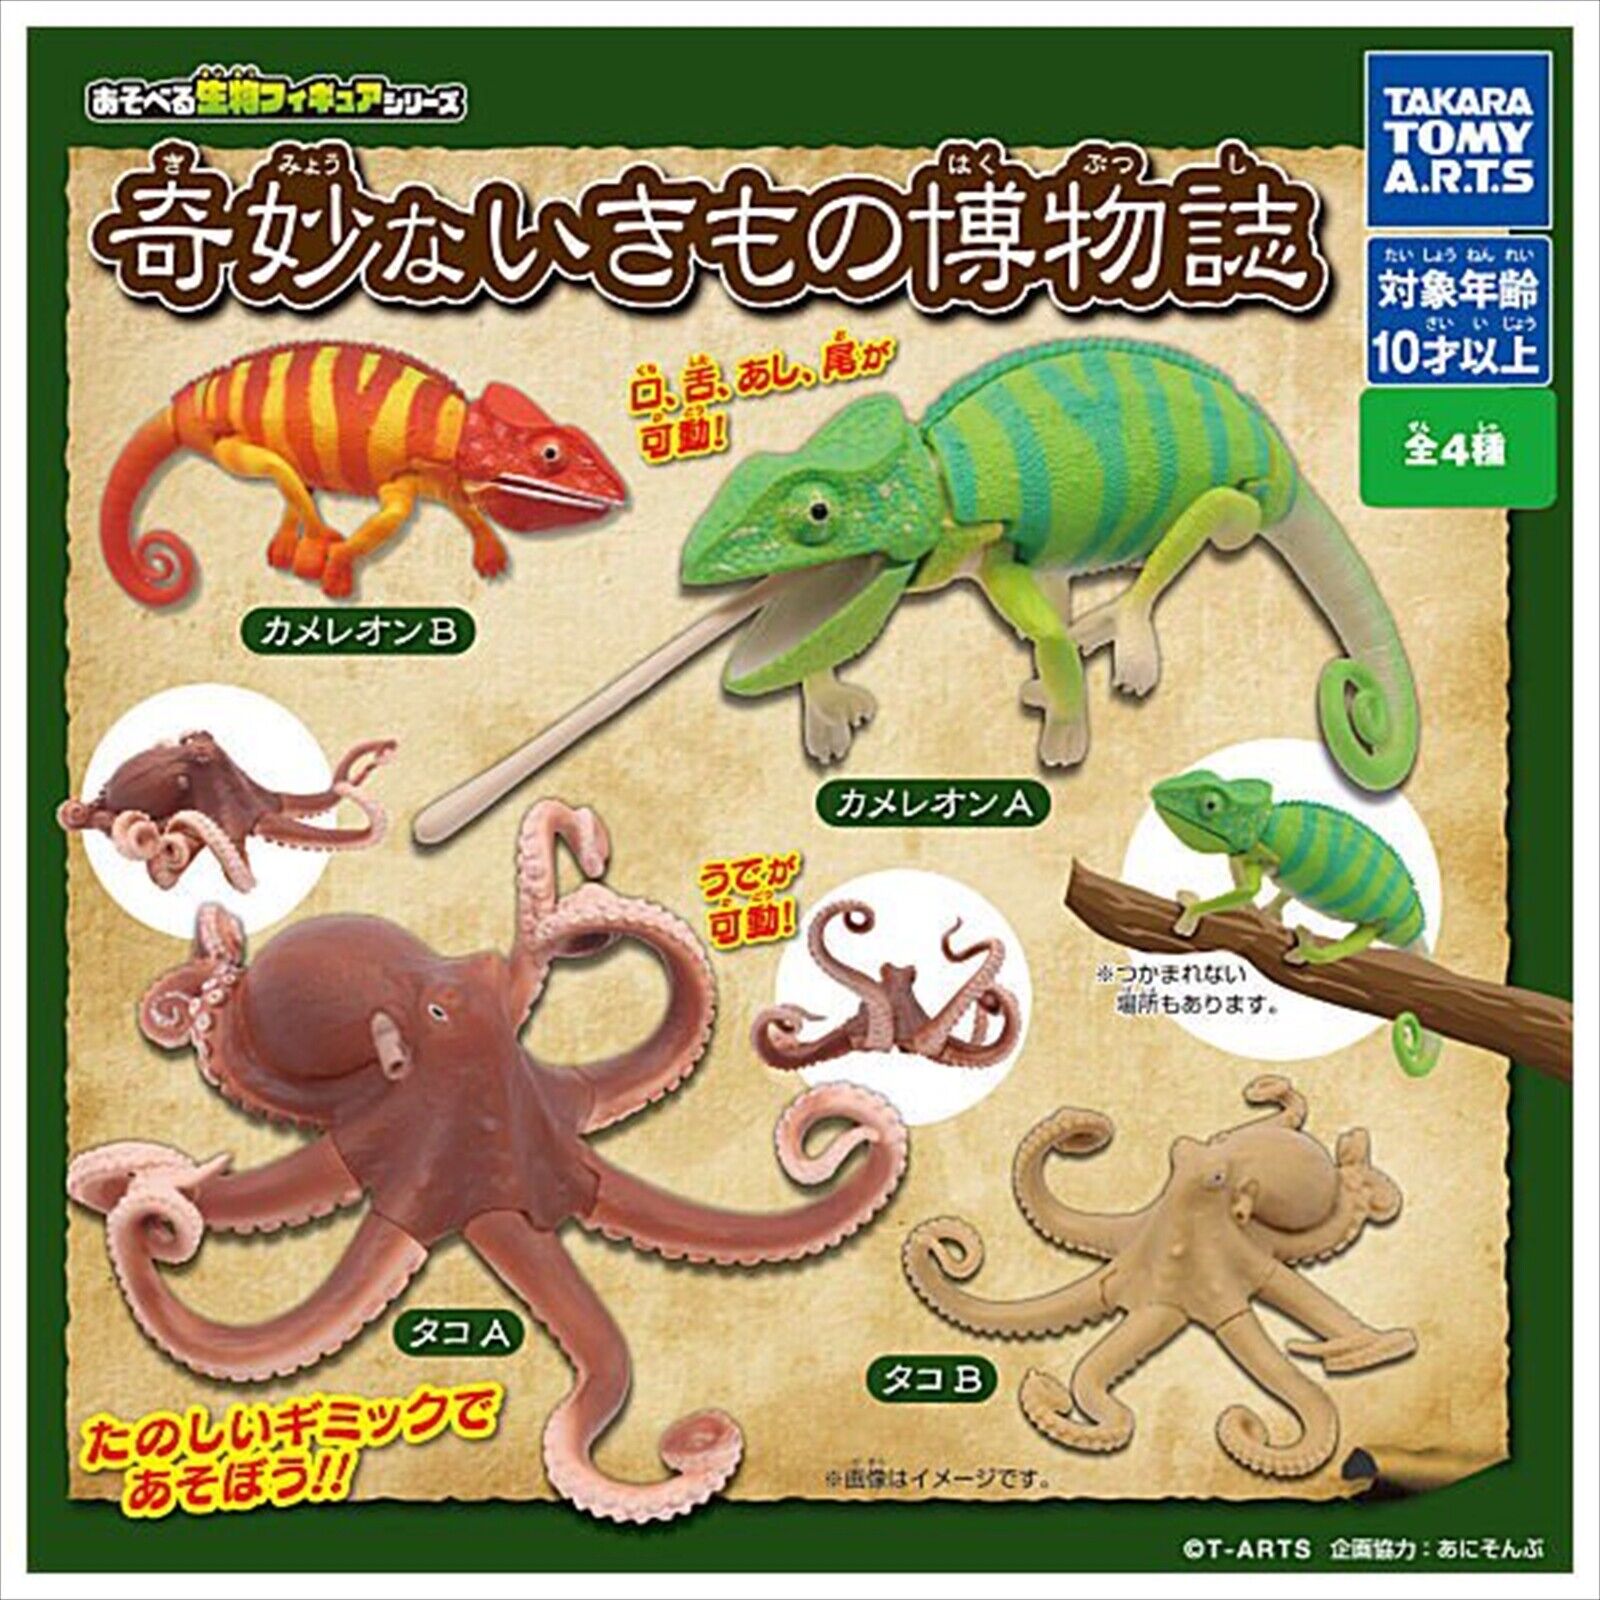 Chameleon Octopus Playable creature figure series Complete T-Arts Capsule Toy